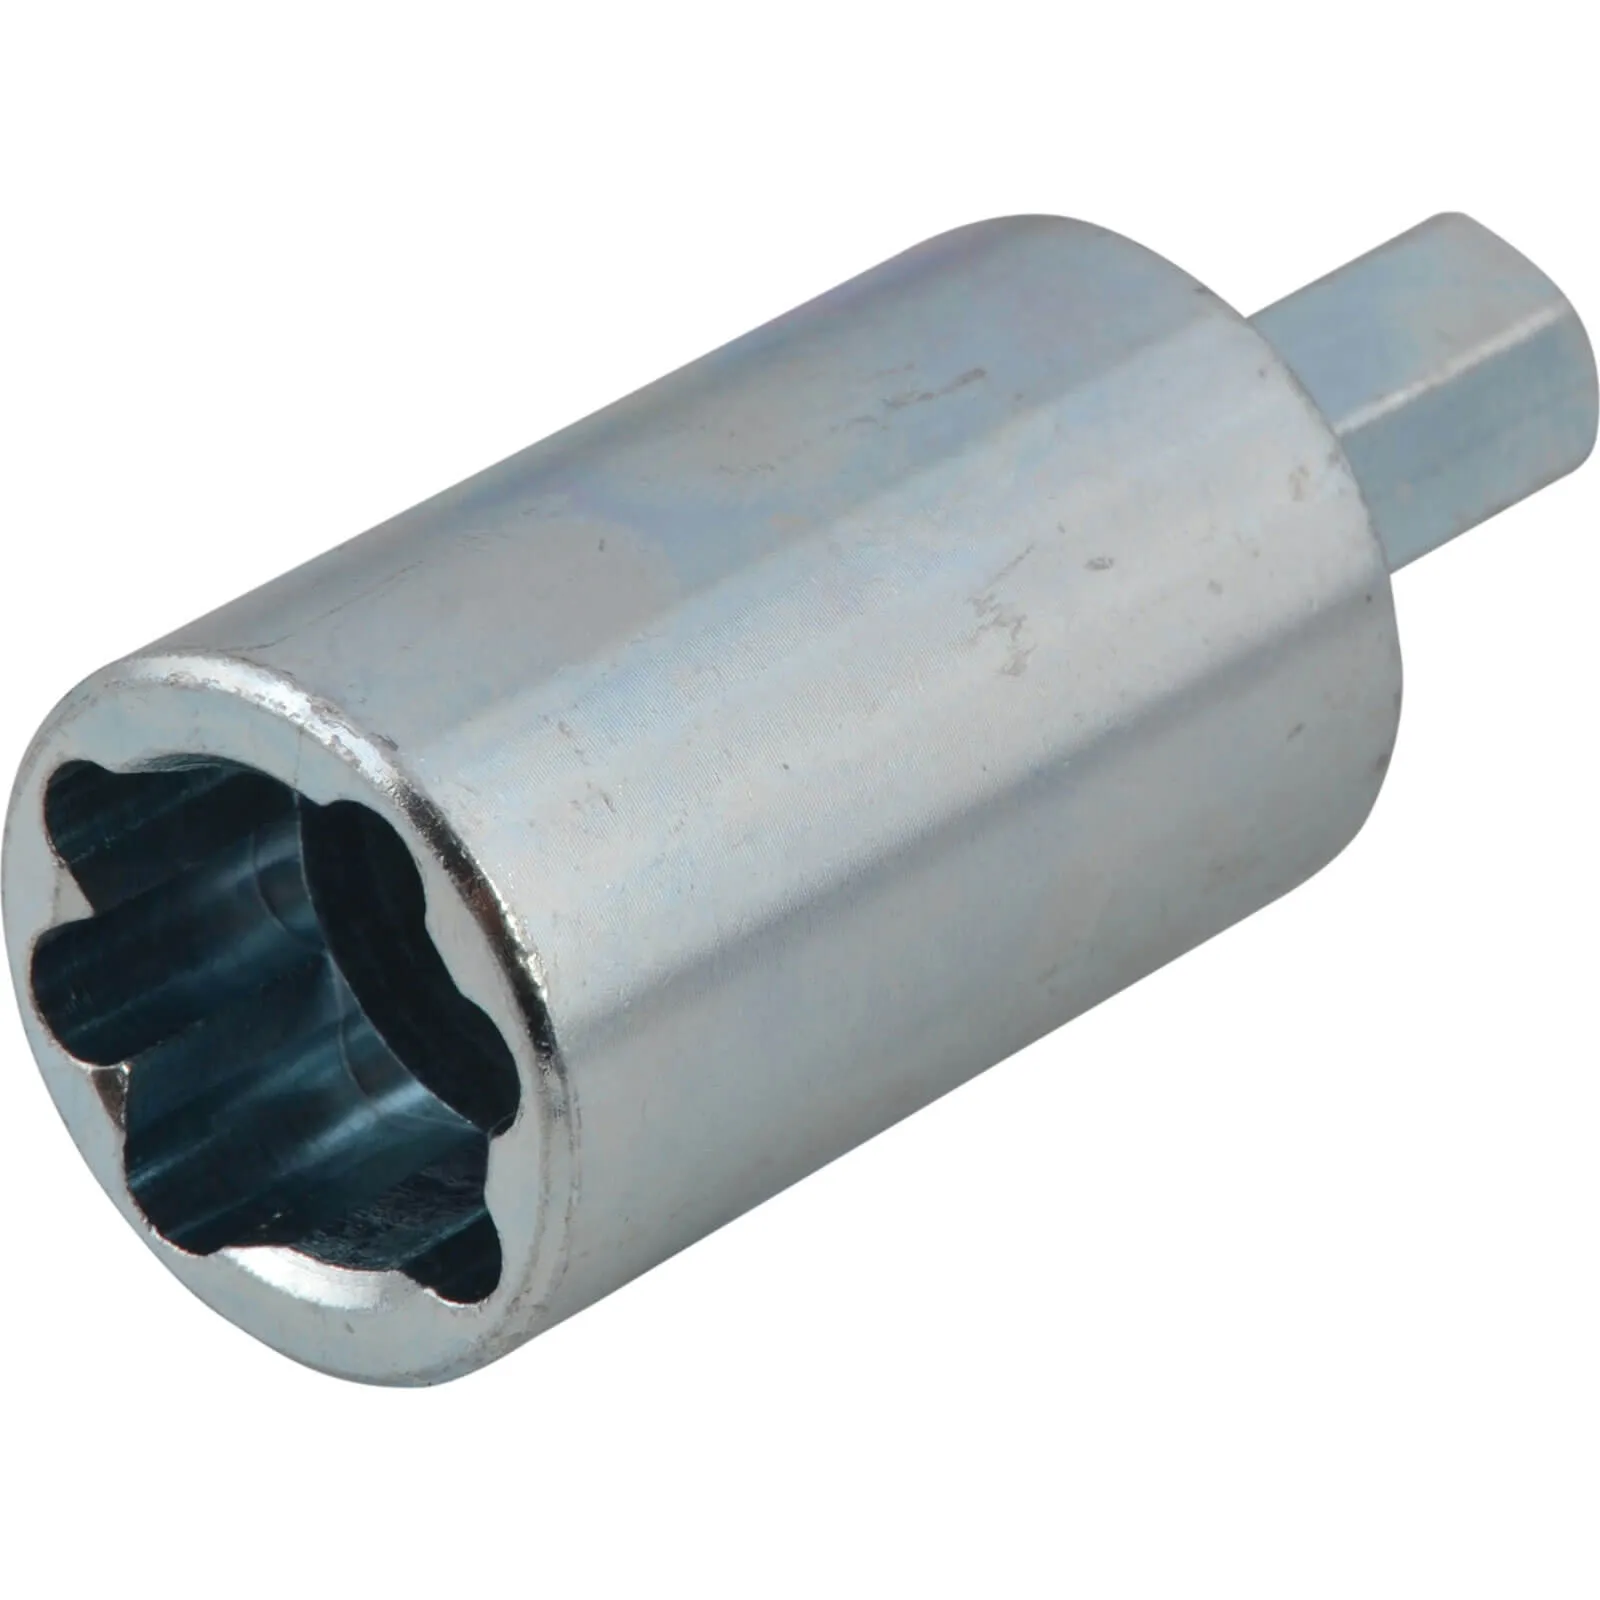 Monument Tail Driver Fitting Socket Tool